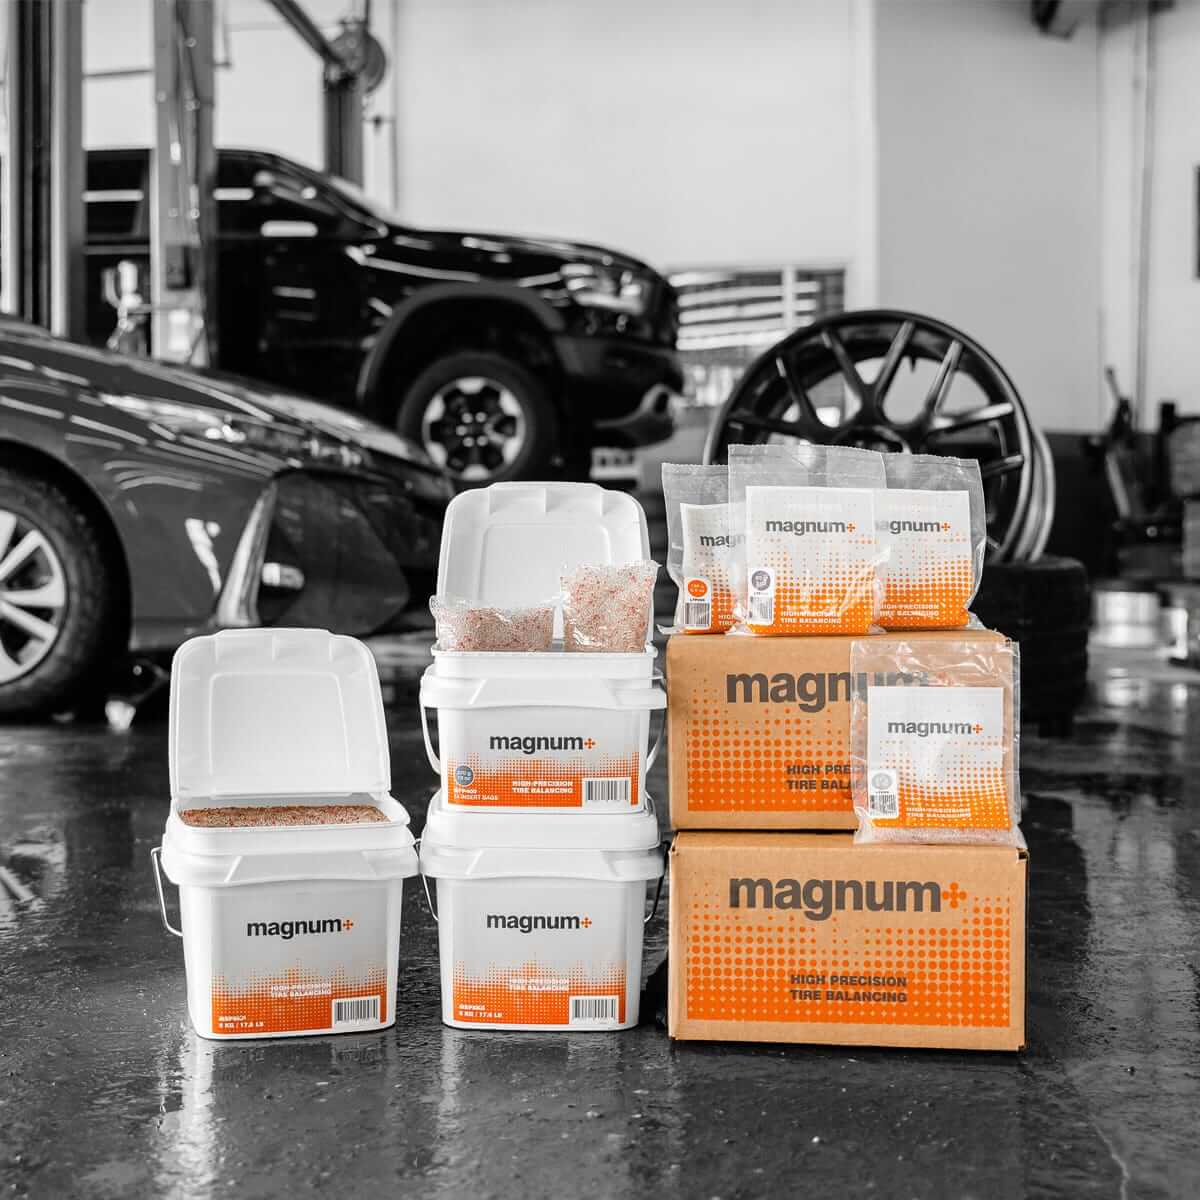 Magnum+ Tire Balancing Beads OZ Set of Bags, TPMS Compatible (LTP100)  Silverback